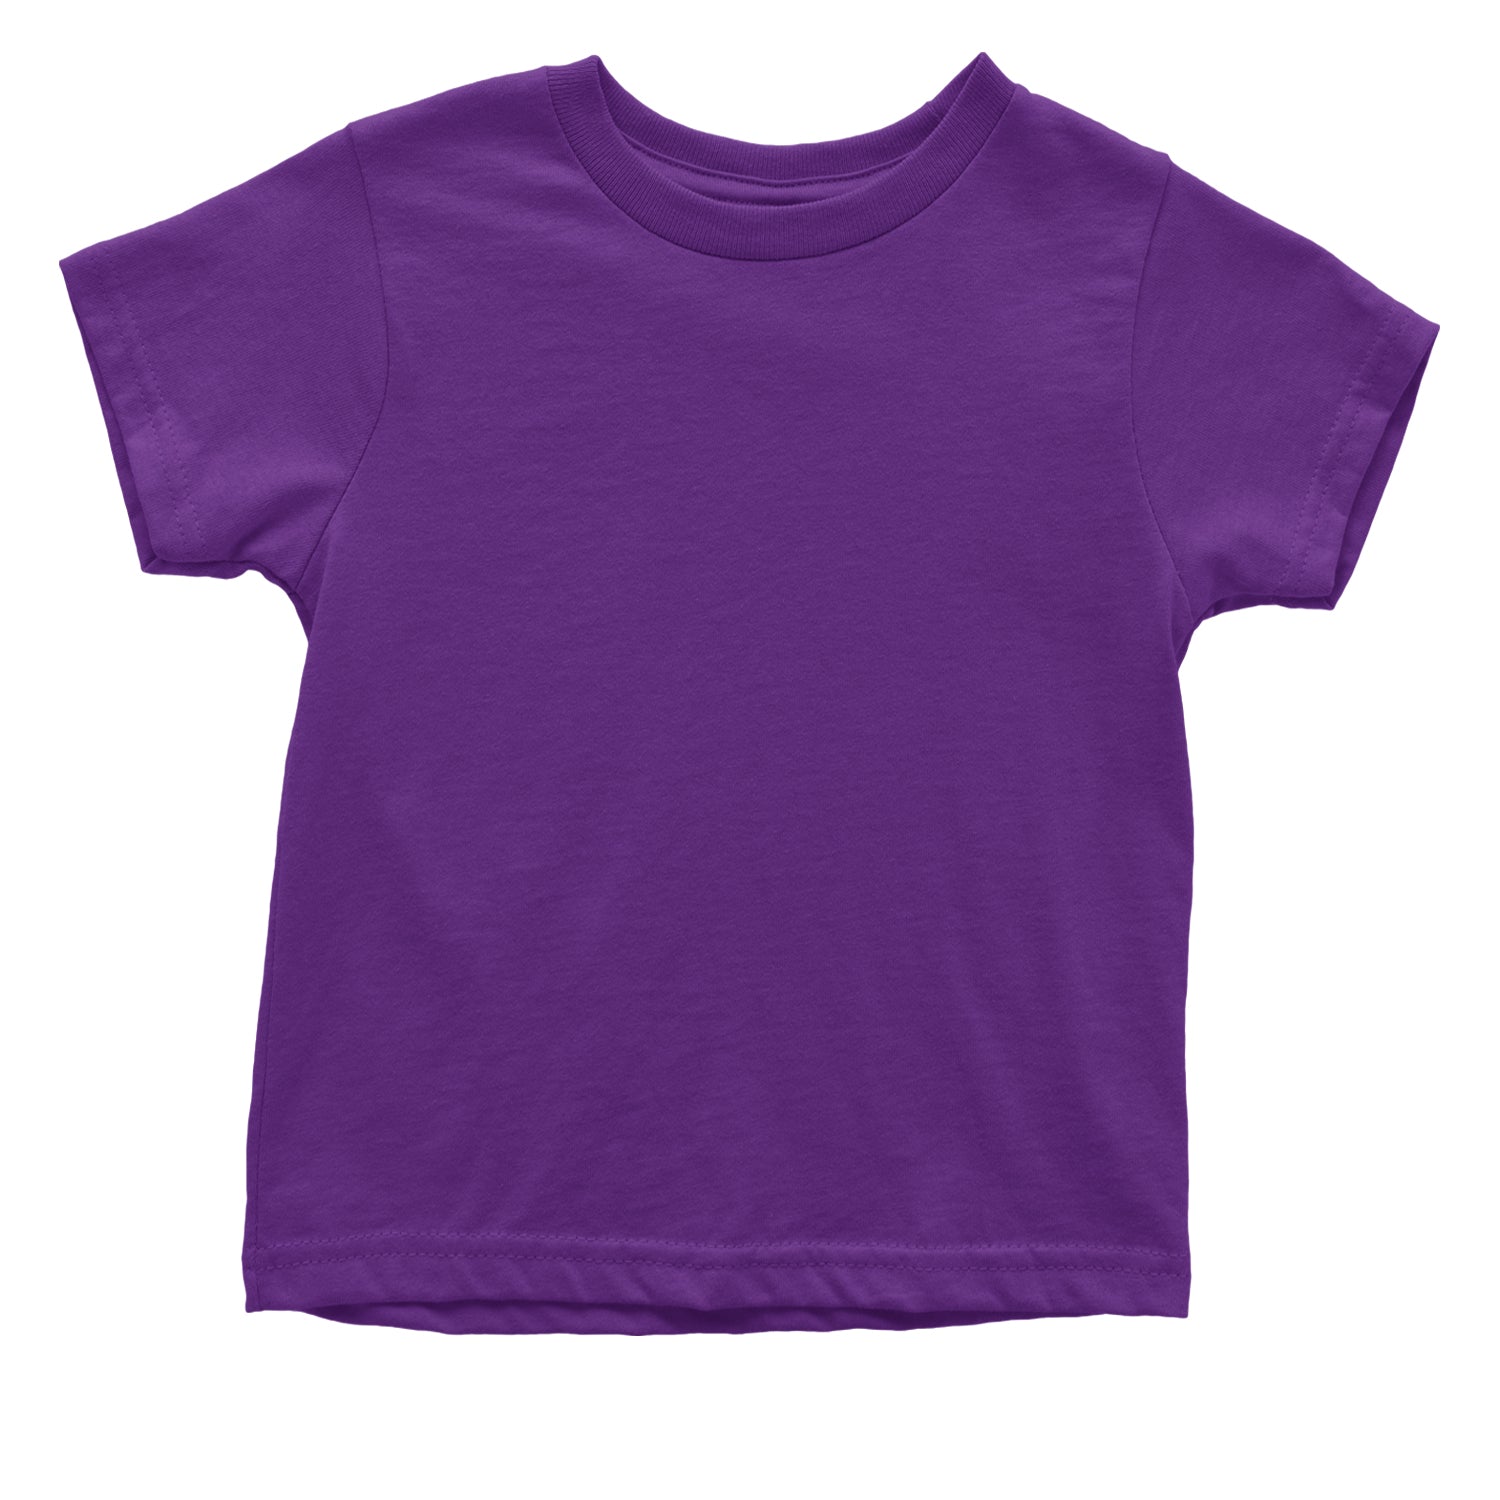 Custom Toddler T-shirts create your own, custom, CustomClothing, customized, personalized by Expression Tees